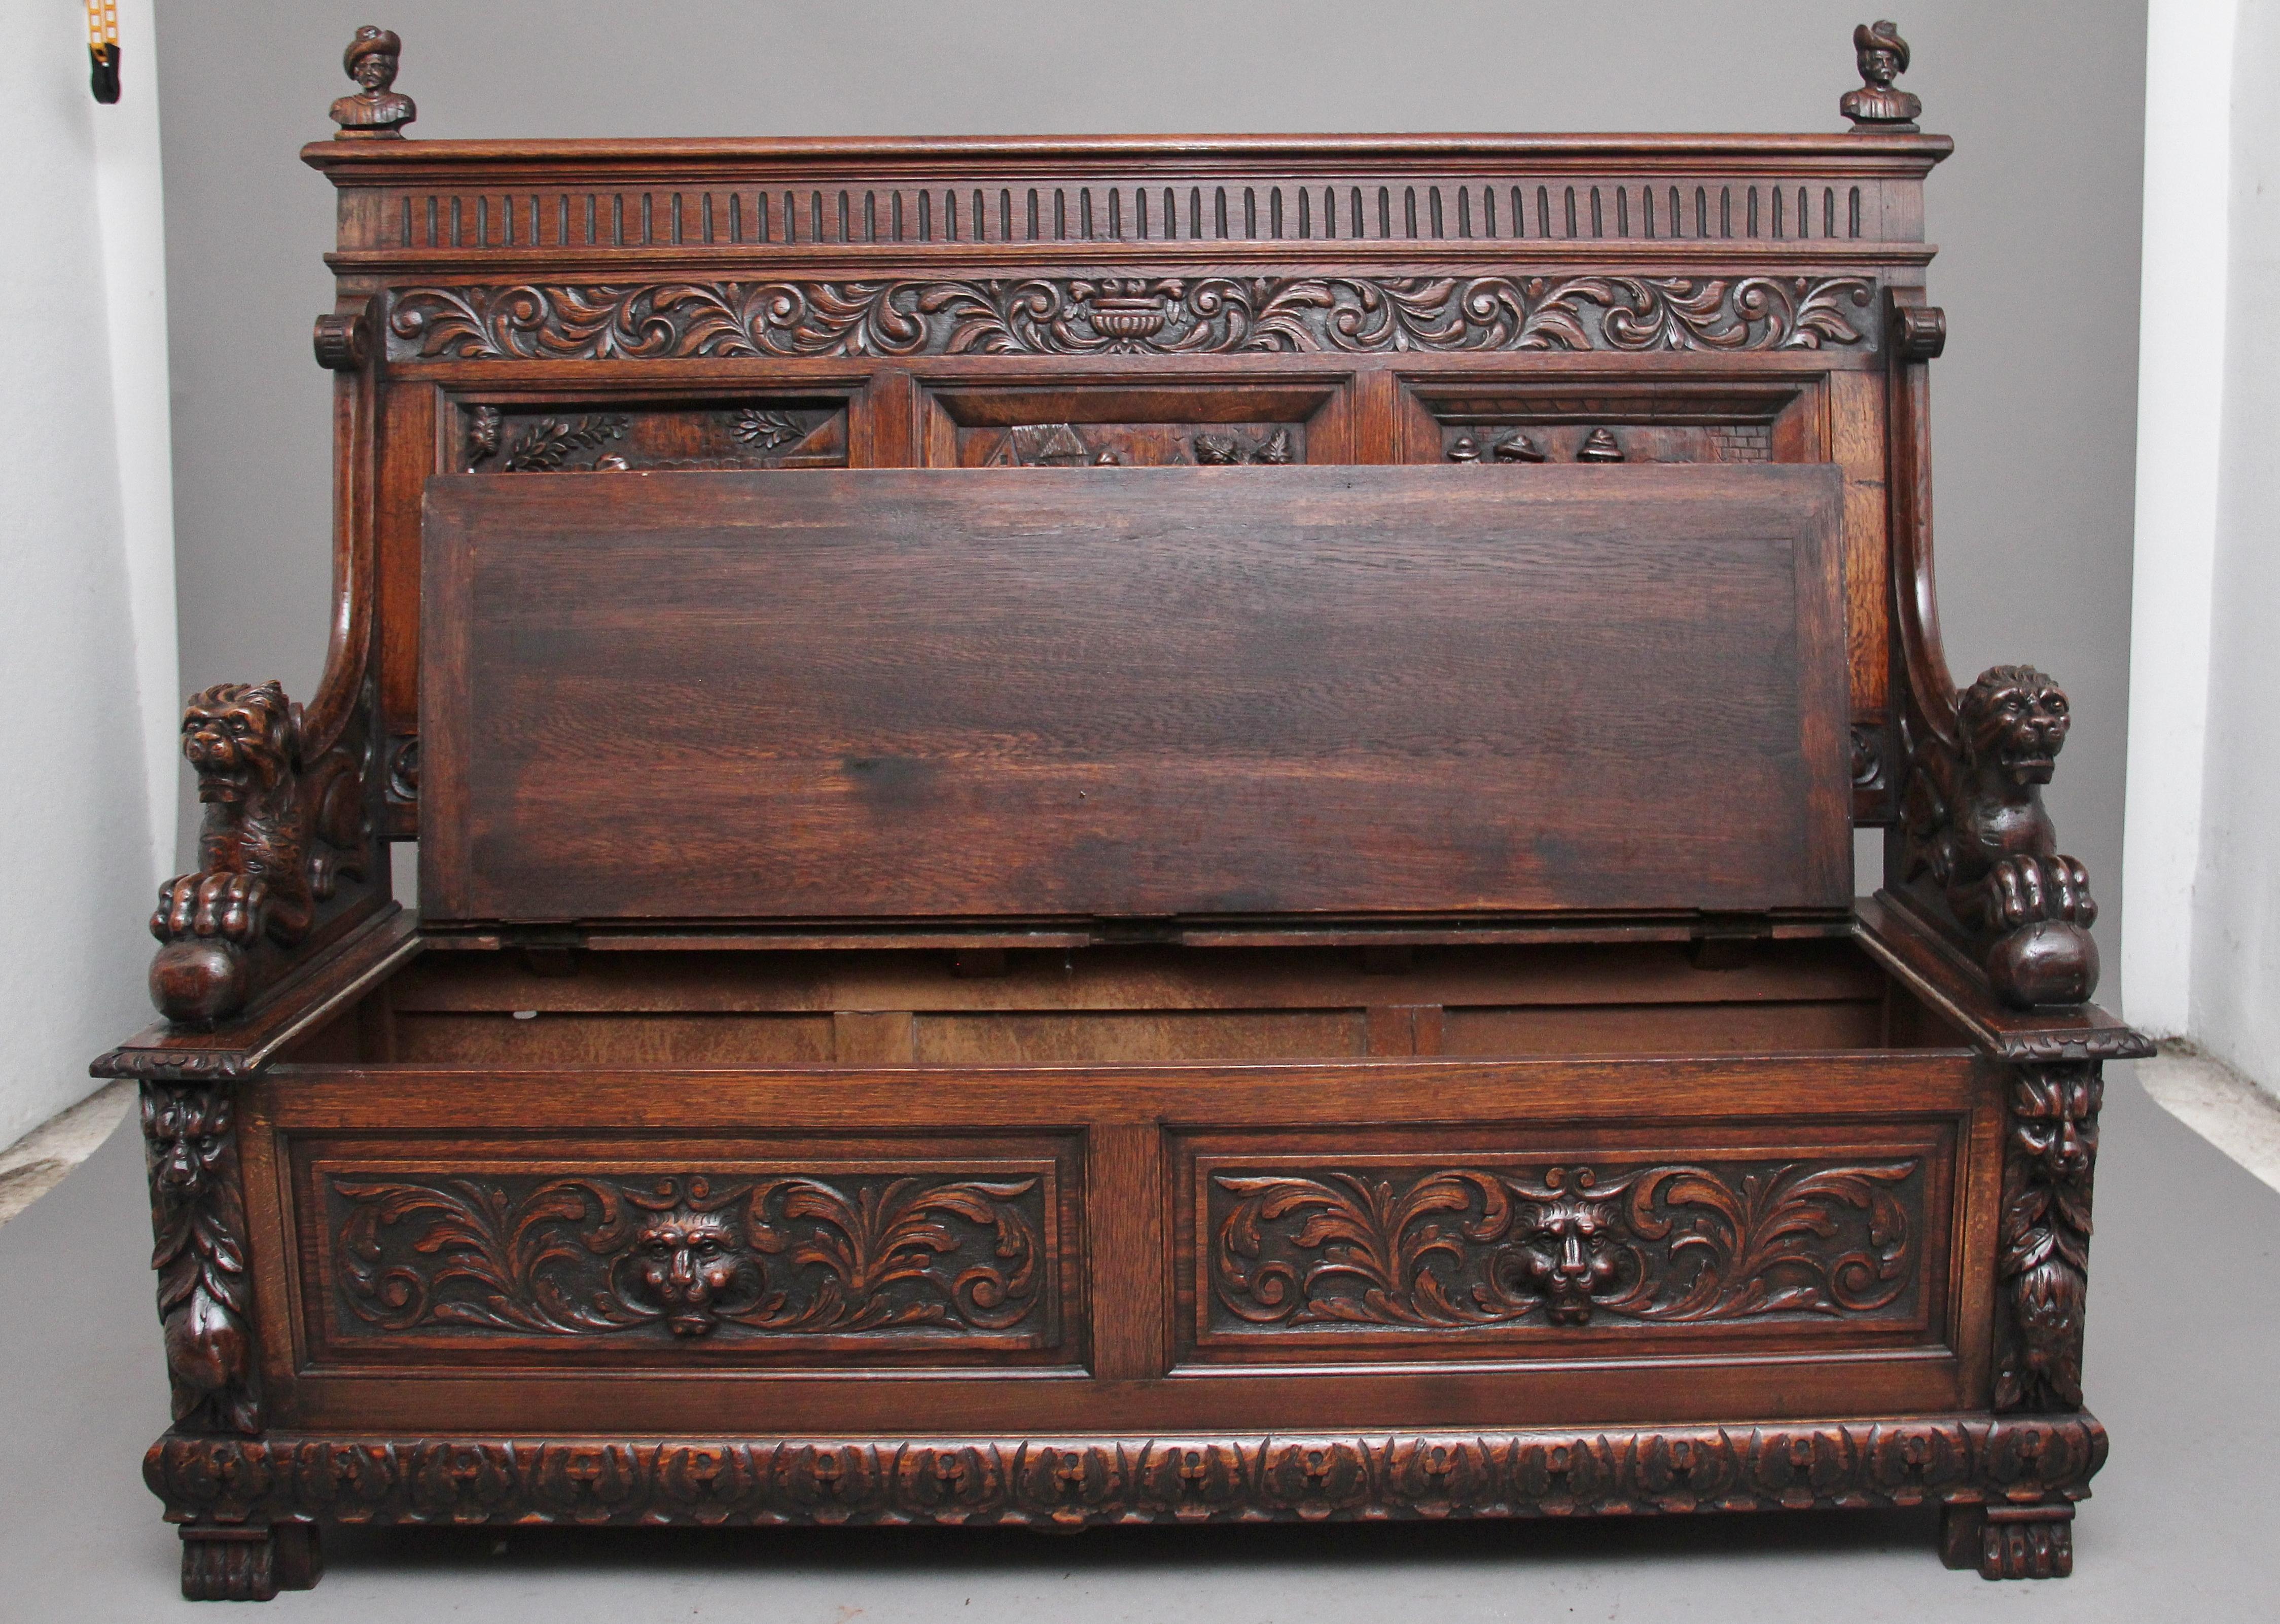 A superb quality 19th century flemish oak box settle that is very well carved, the back having three carved panels depicting tavern scenes, the top of the back having two carved figure heads above a carved frieze, the arms carved with lions with